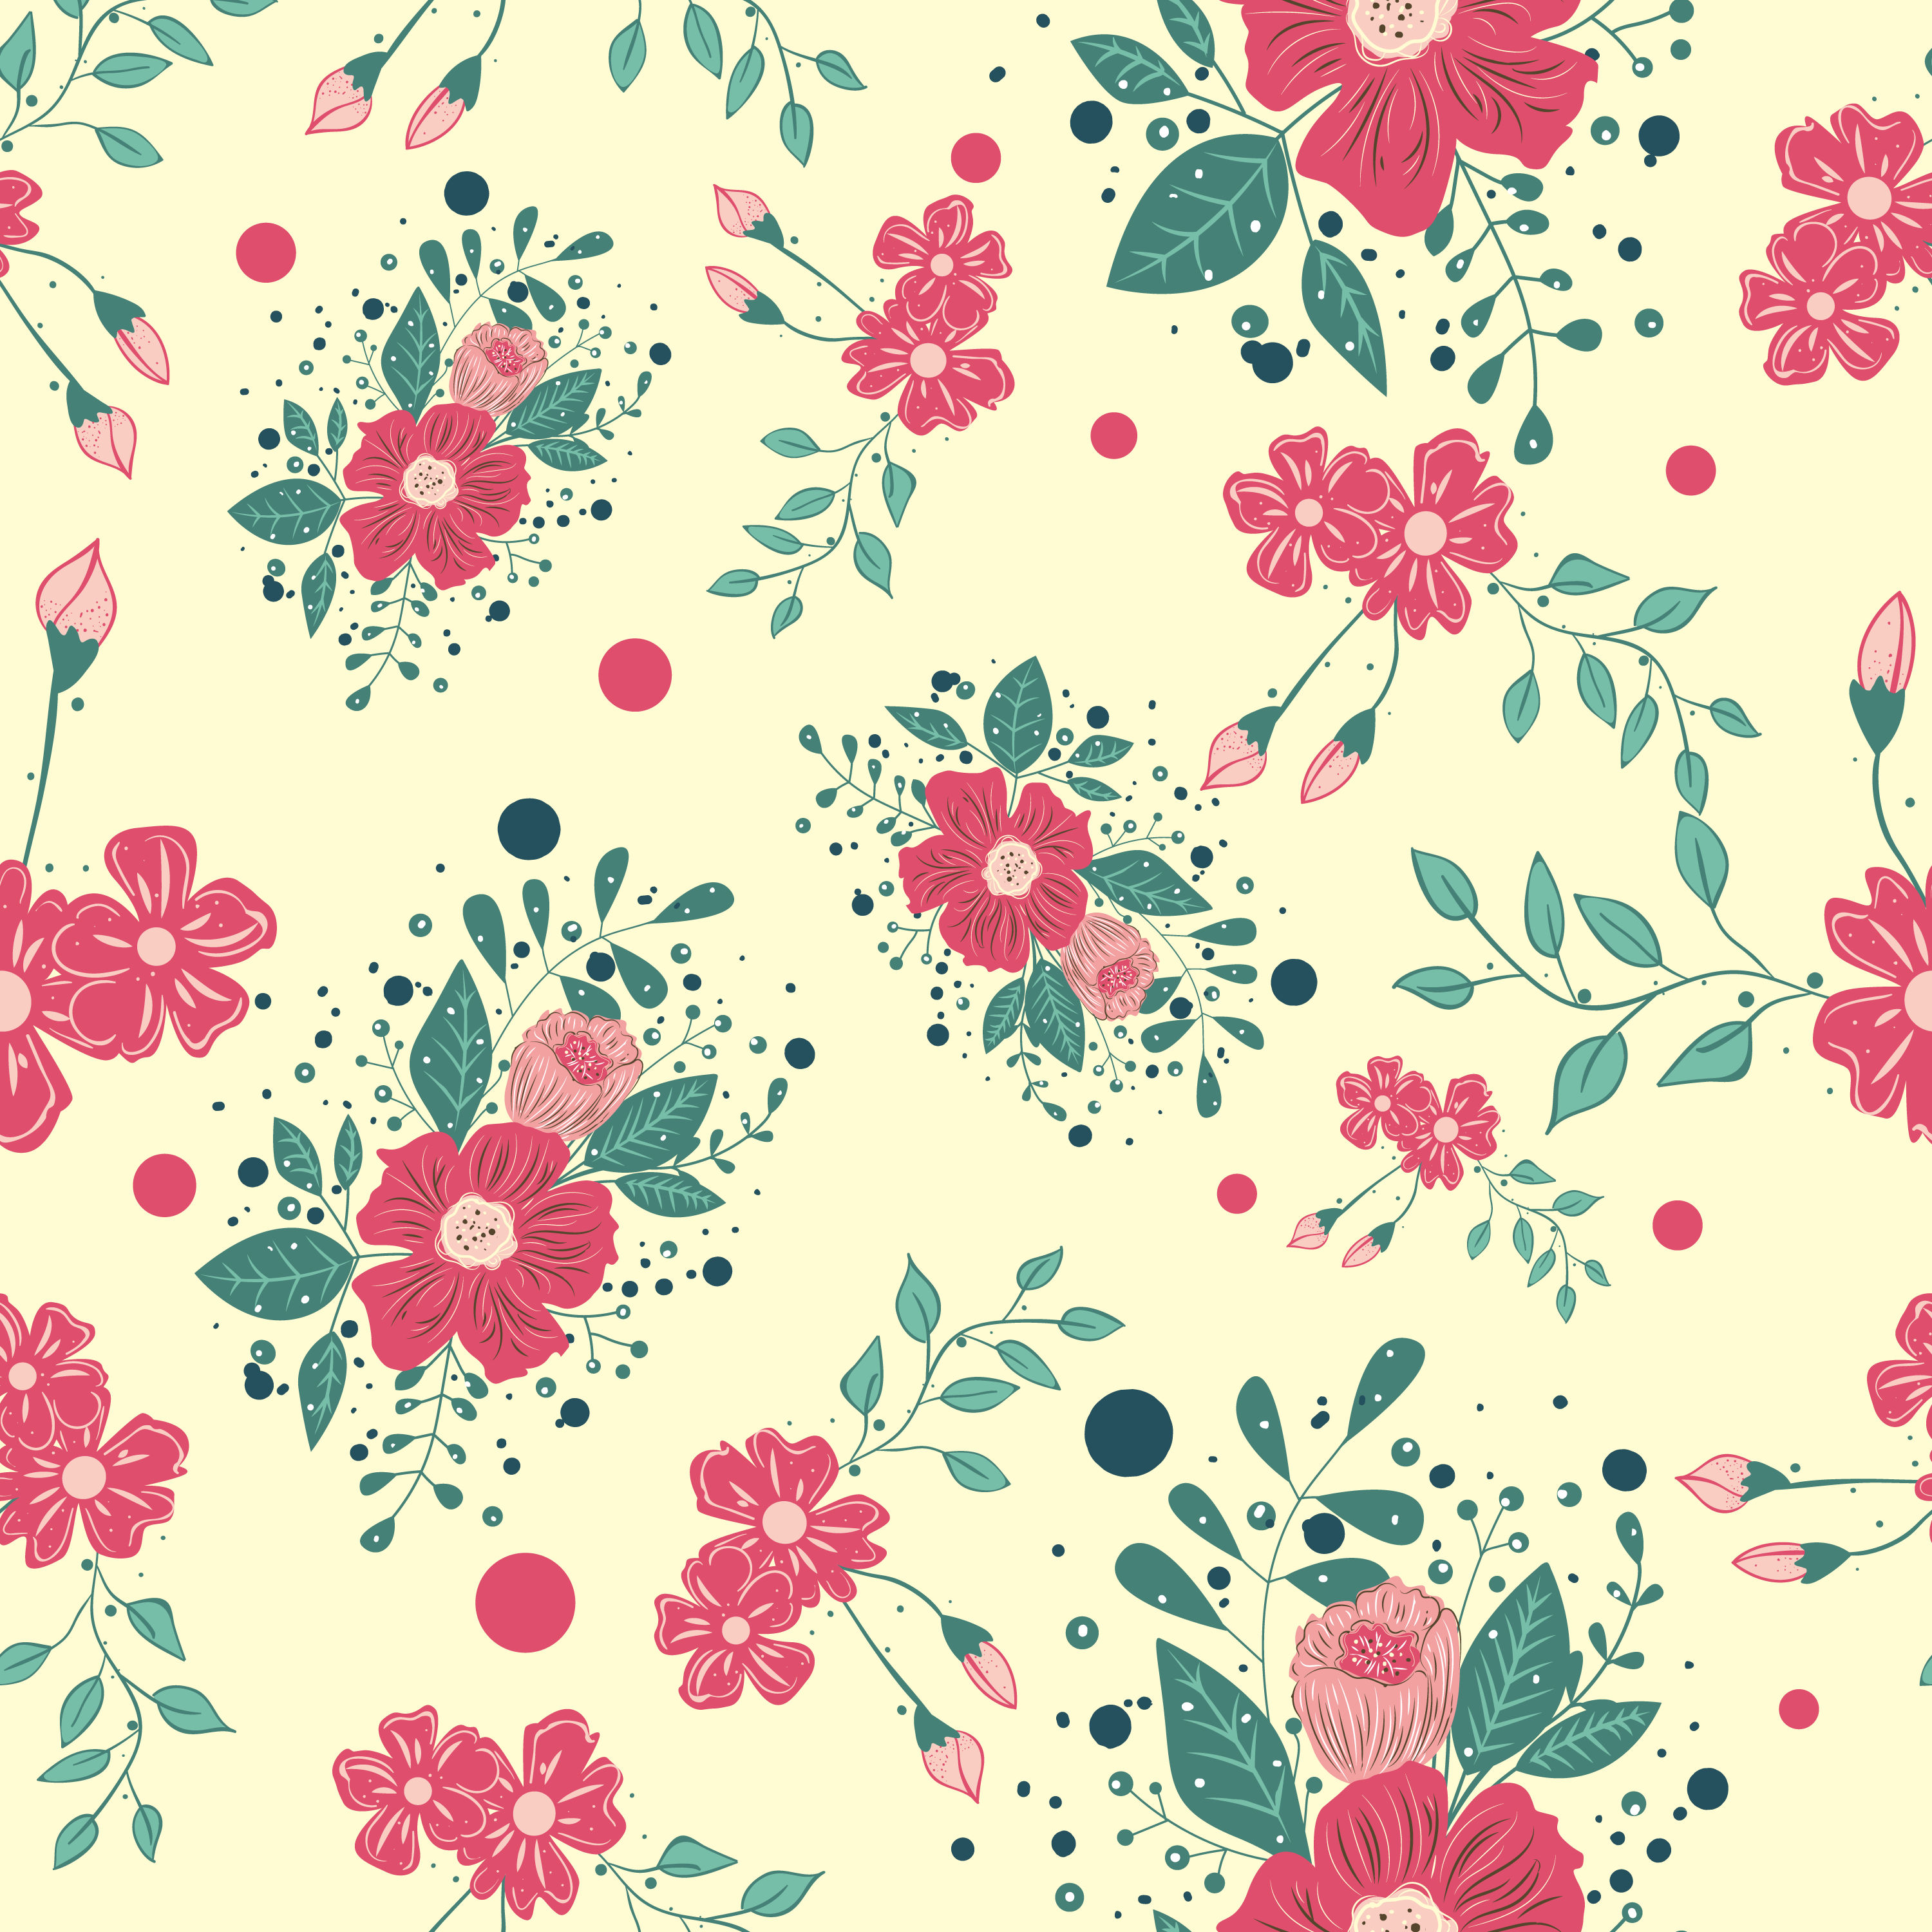 Wrapping Paper Flower Pattern Free Photo Download